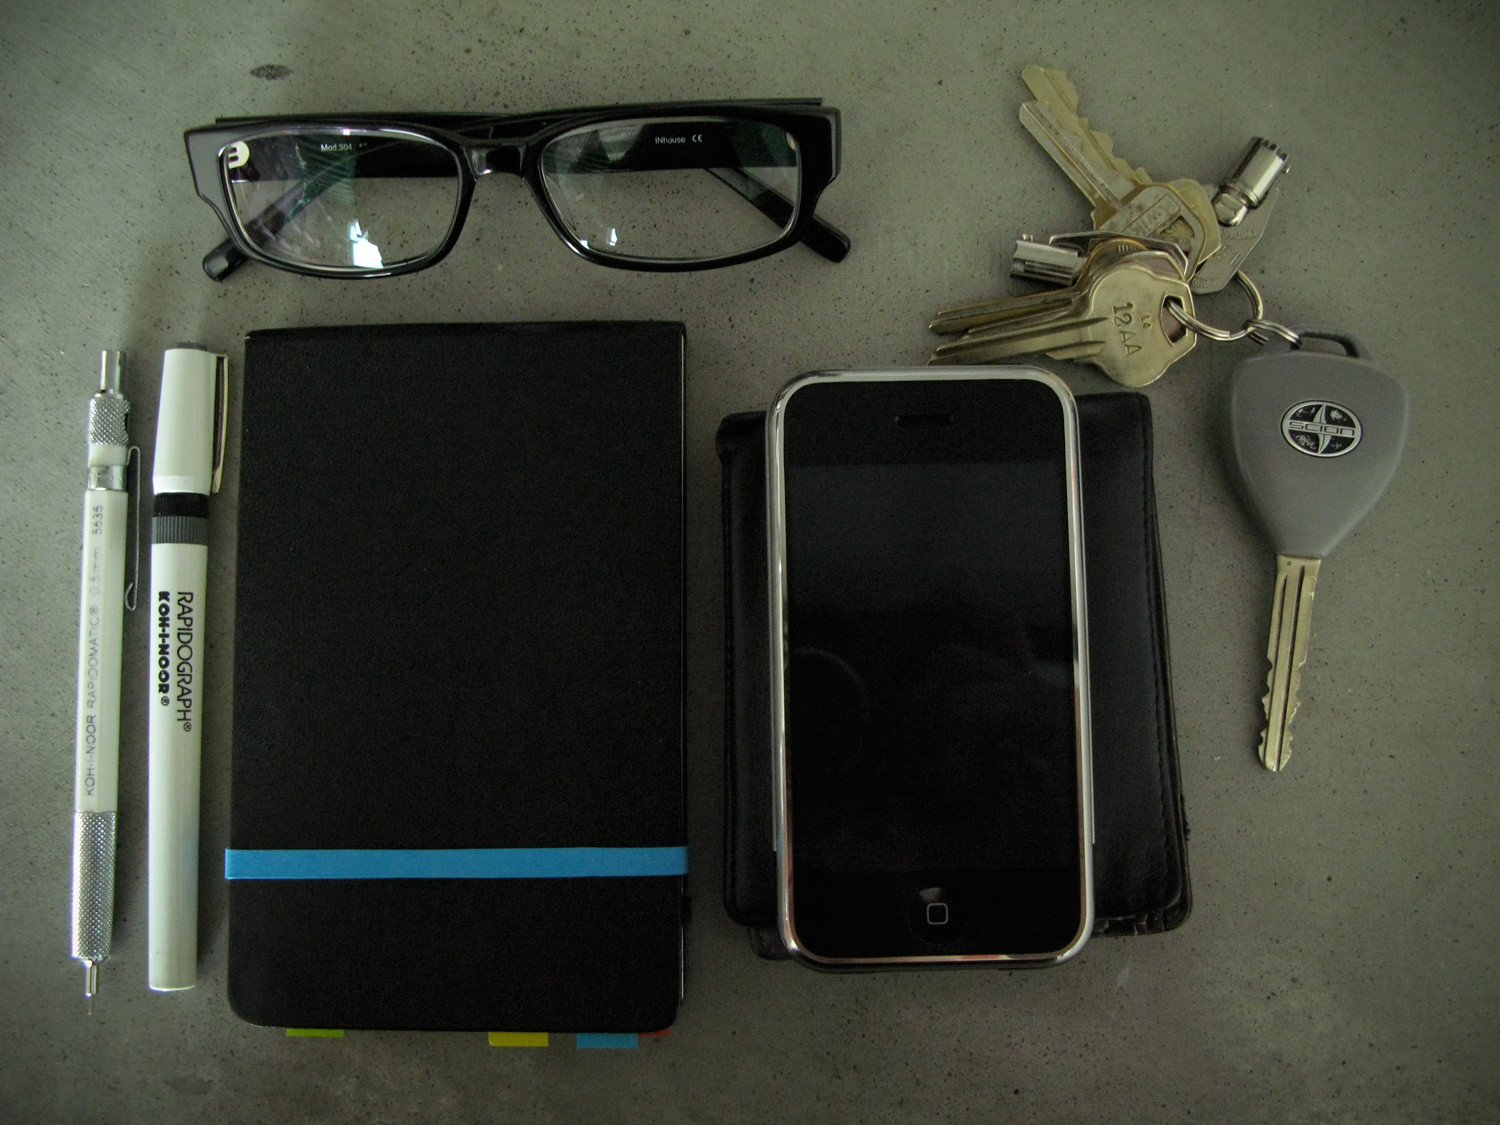 the contents of a travel bag including keys, wallet and cell phone